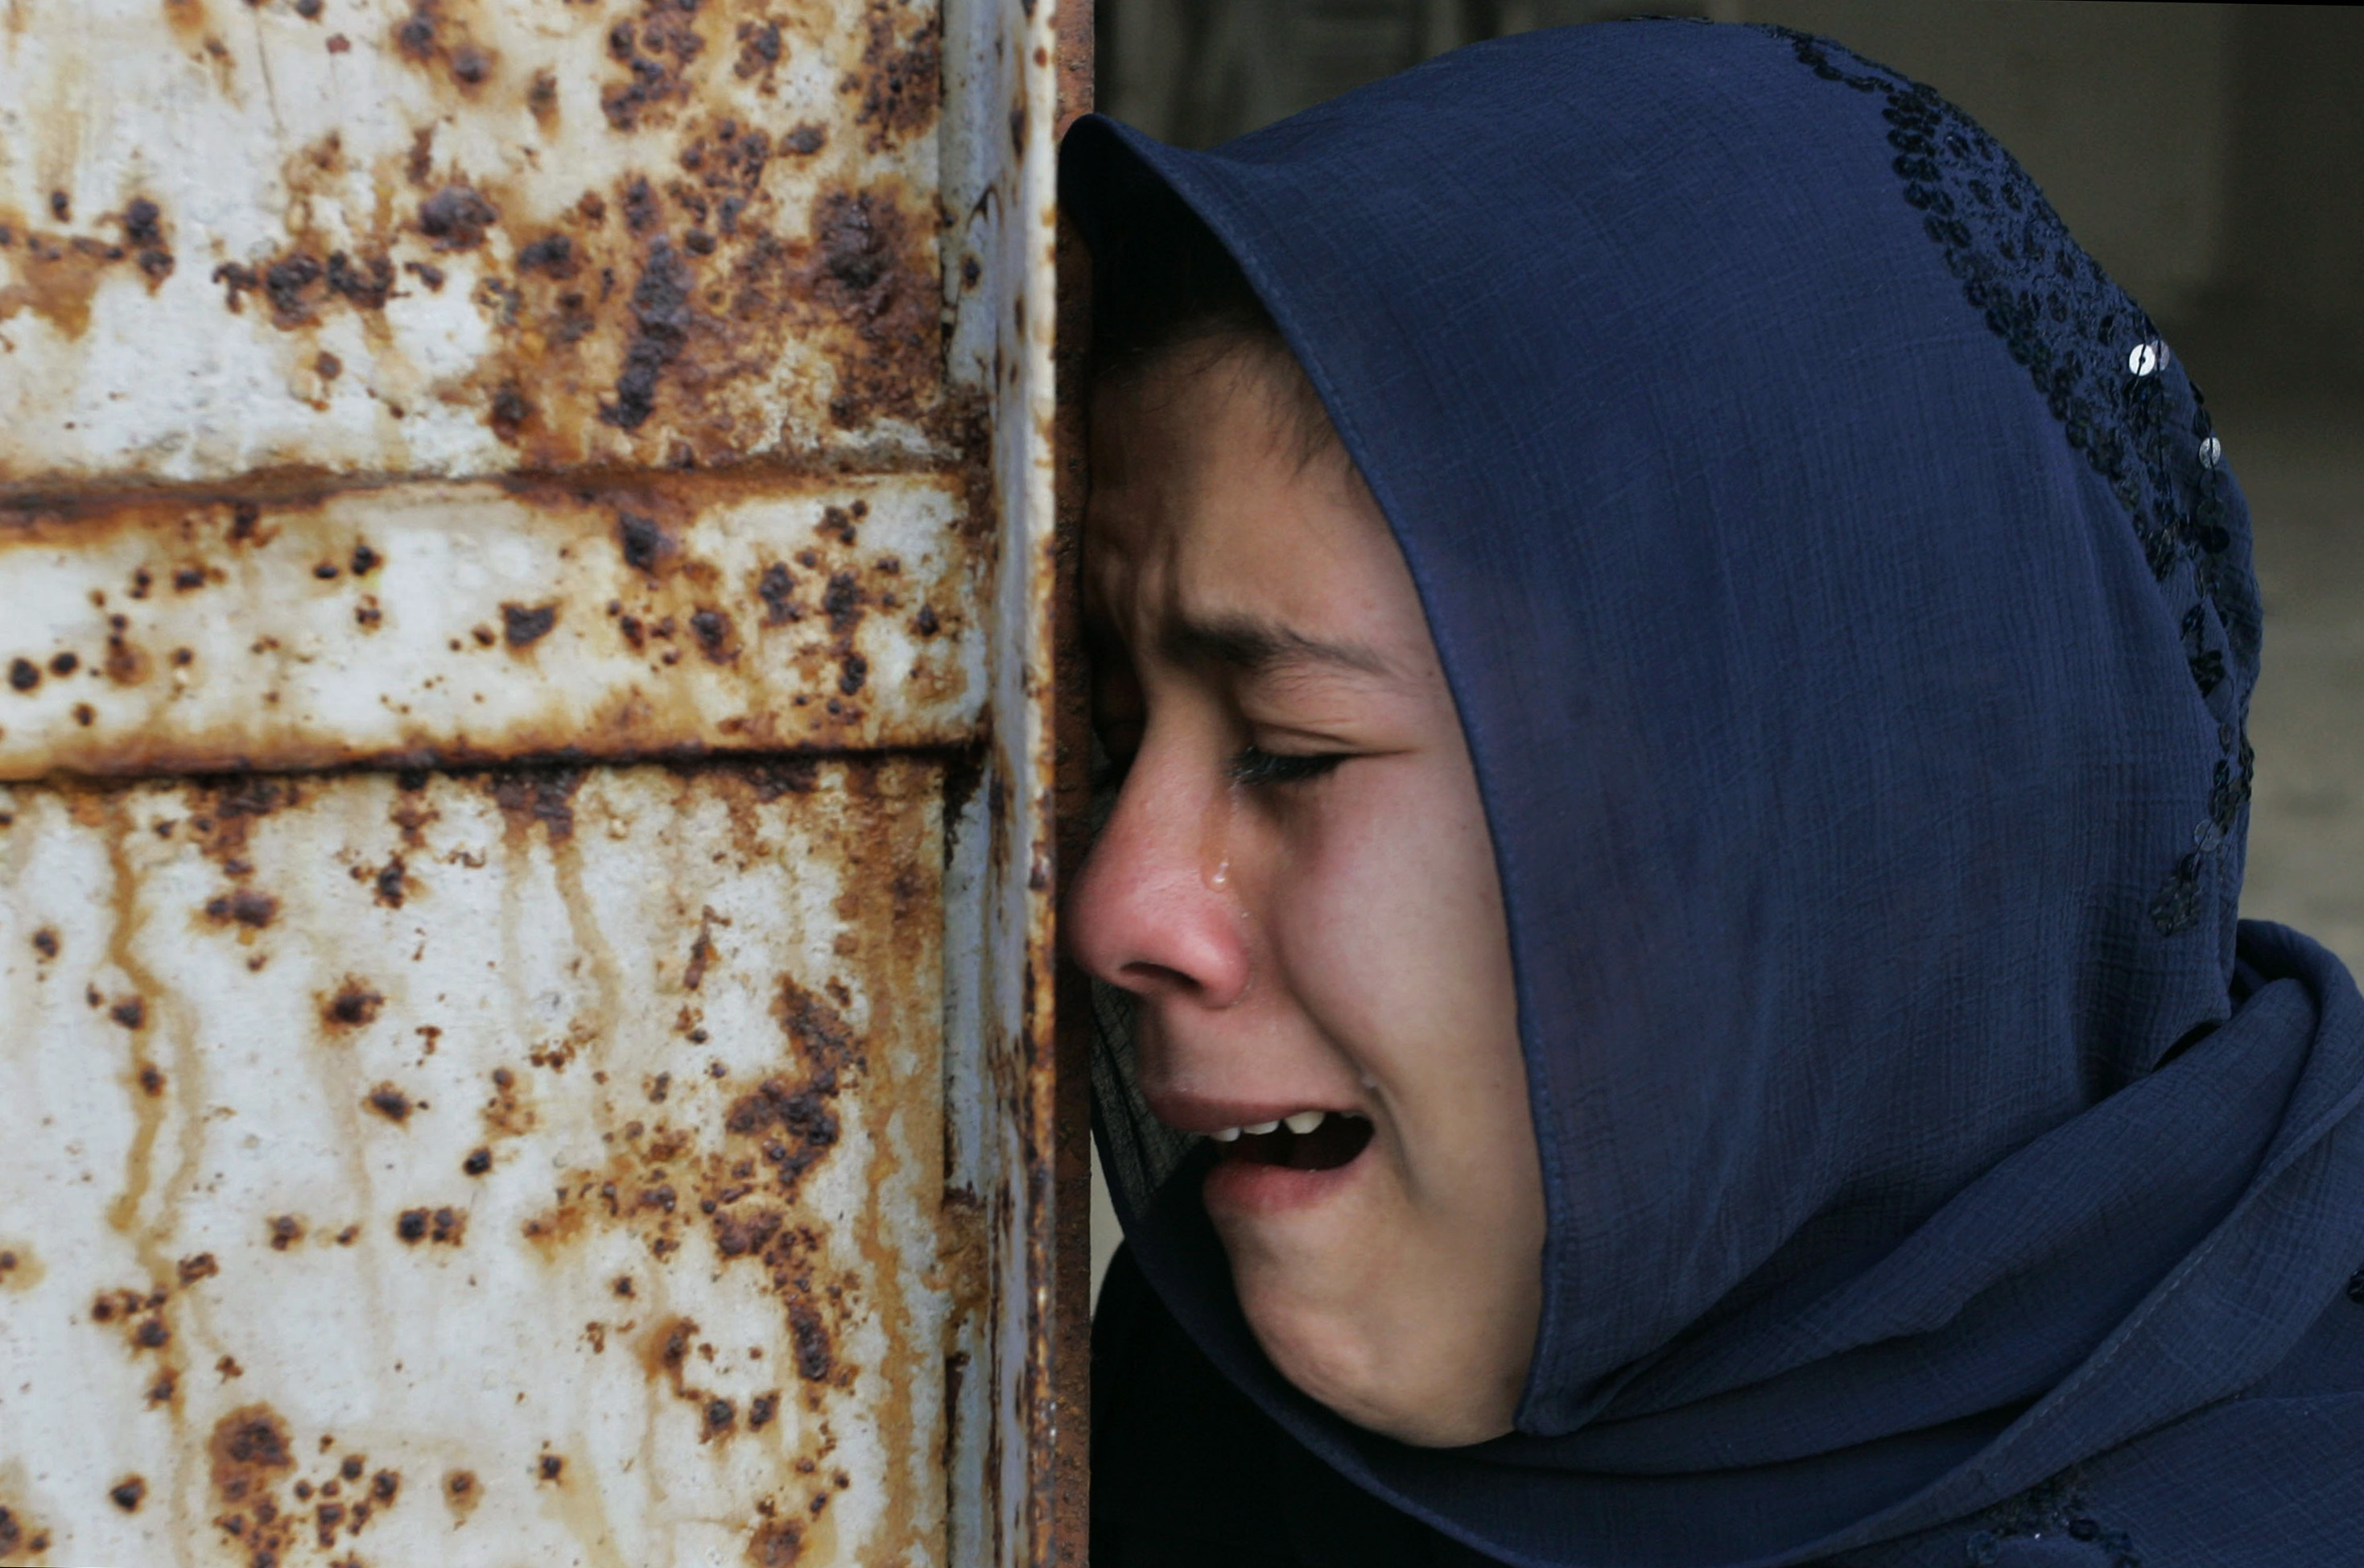 A Palestinian woman who had 10 relatives killed near a United Nations school, weeps during their funeral.